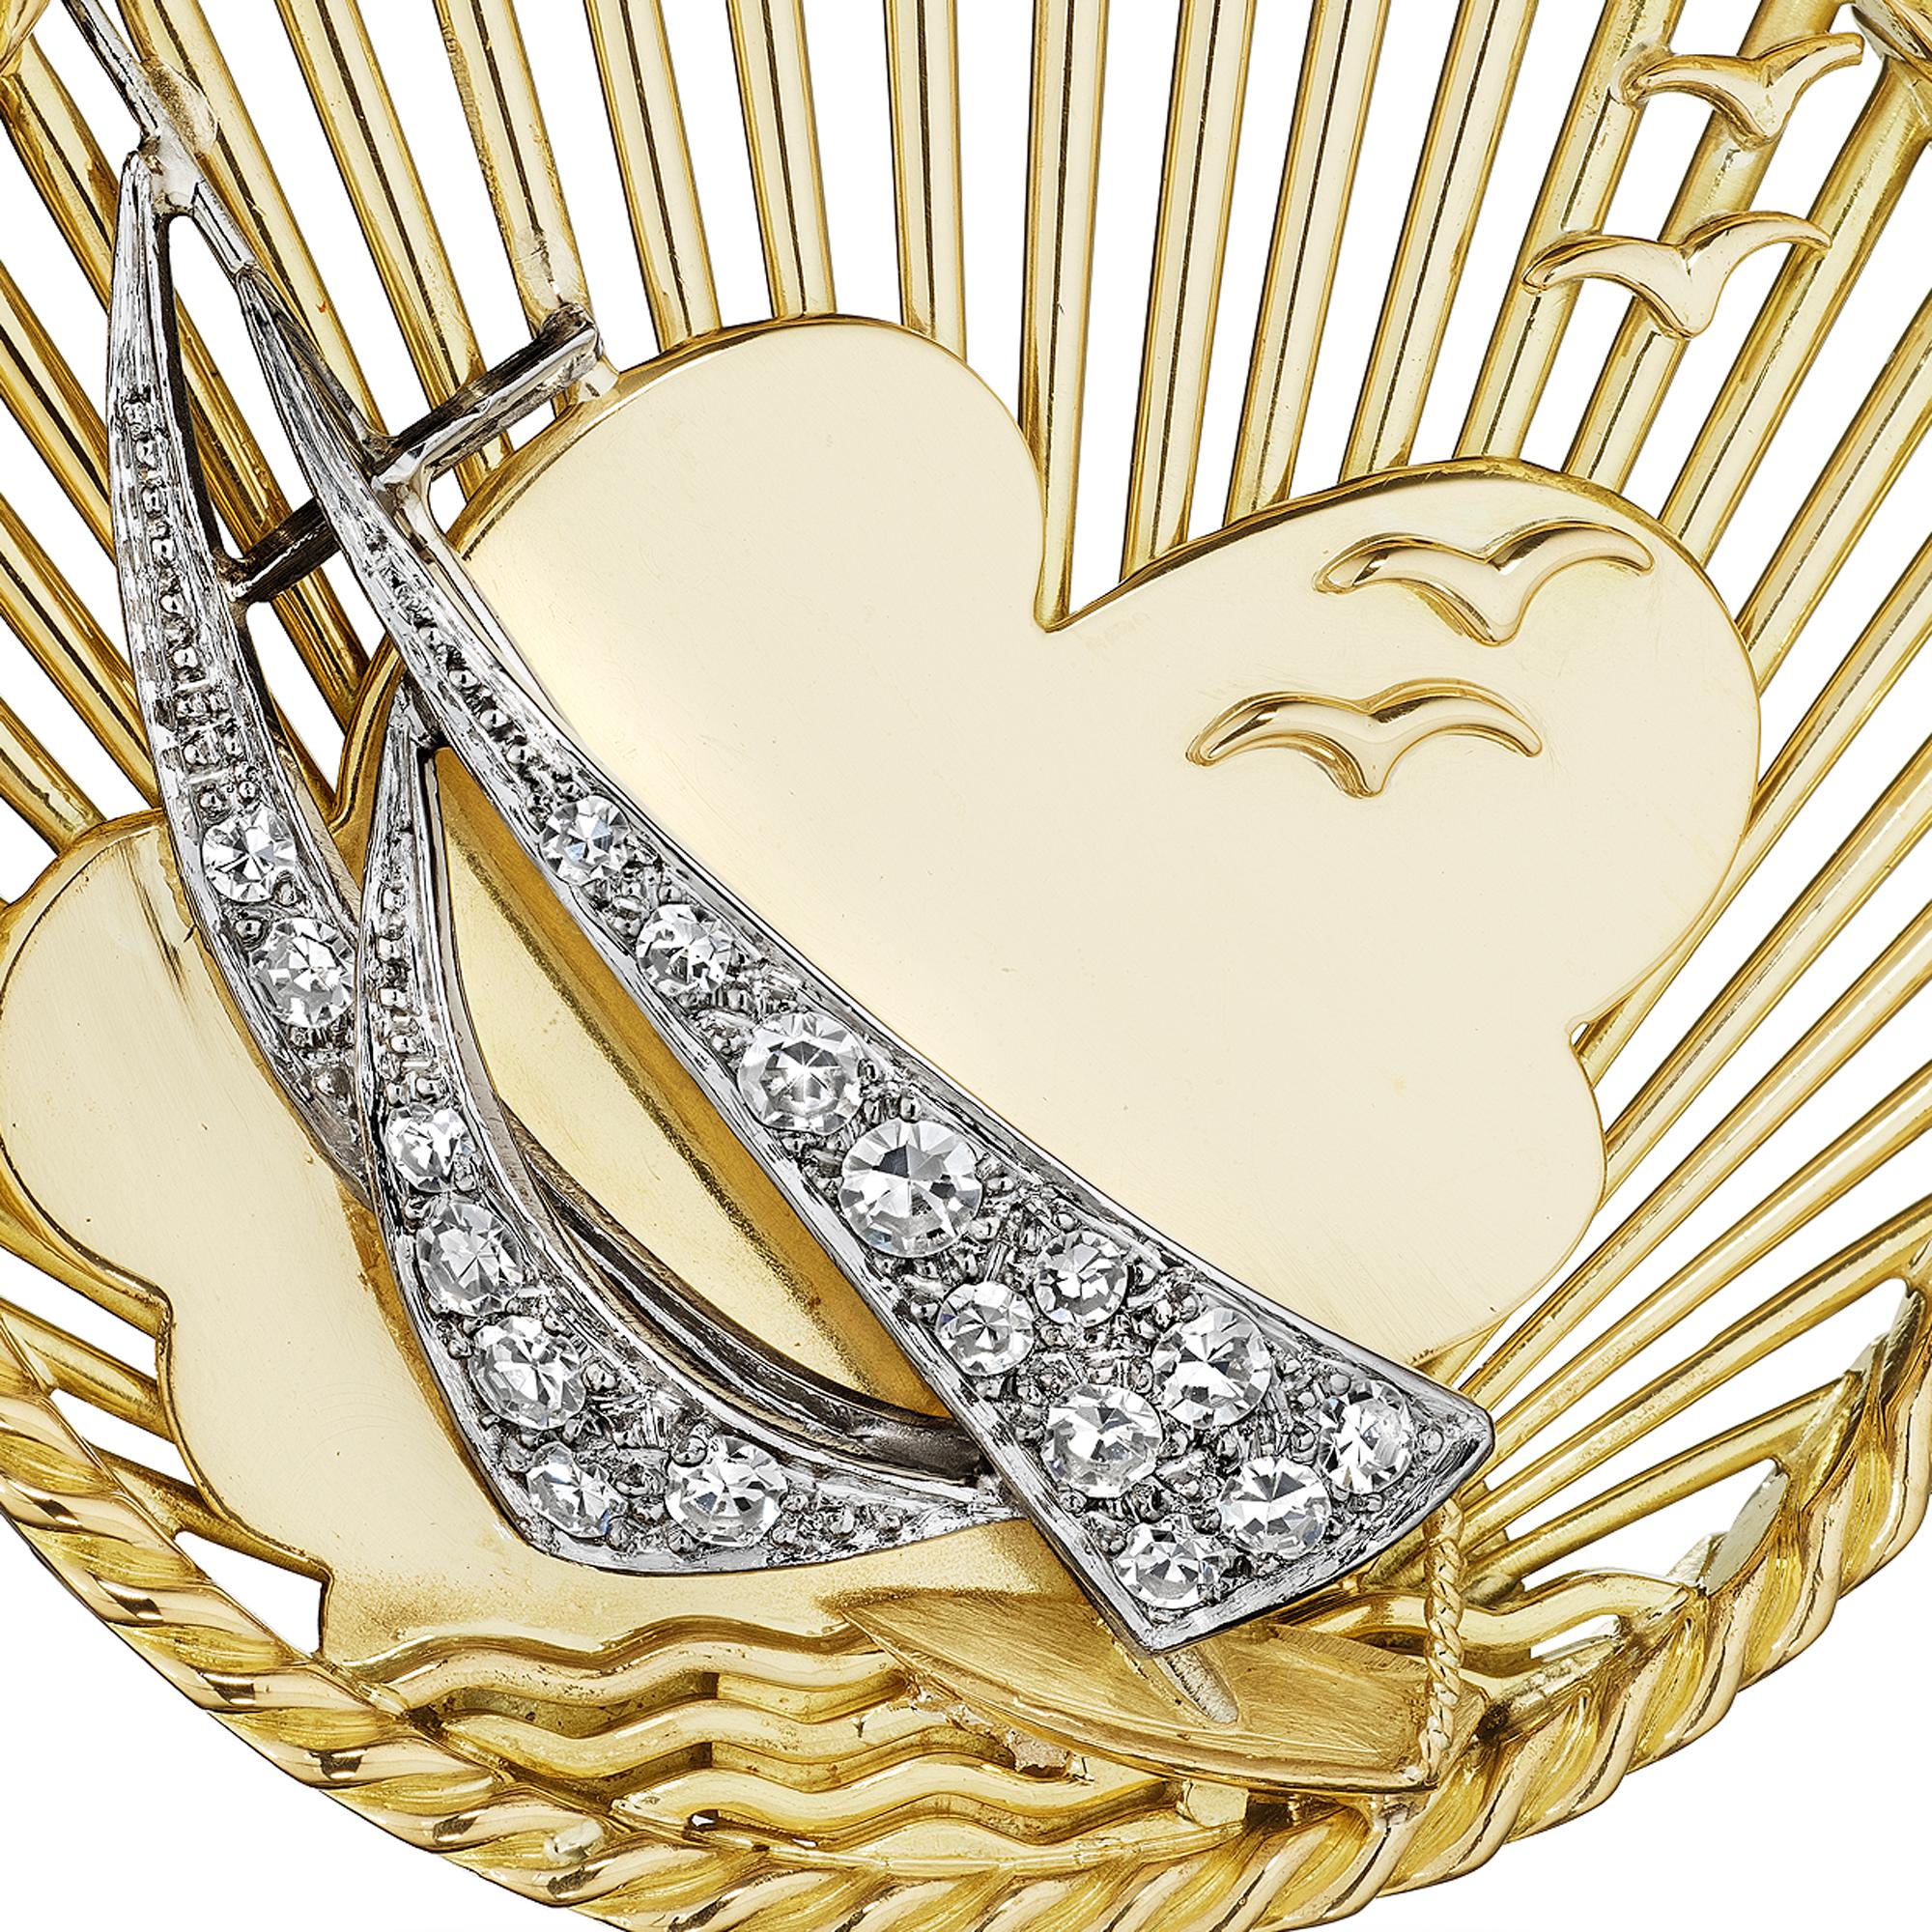 Sail away with this George L'Enfant Tiffany & Co. France mid-century diamond 18 karat yellow gold pendant necklace.  With a diamond sailboat heeling among soaring seagulls and sunlit clouds, this charm will bring you all clear skies.  Signed Tiffany